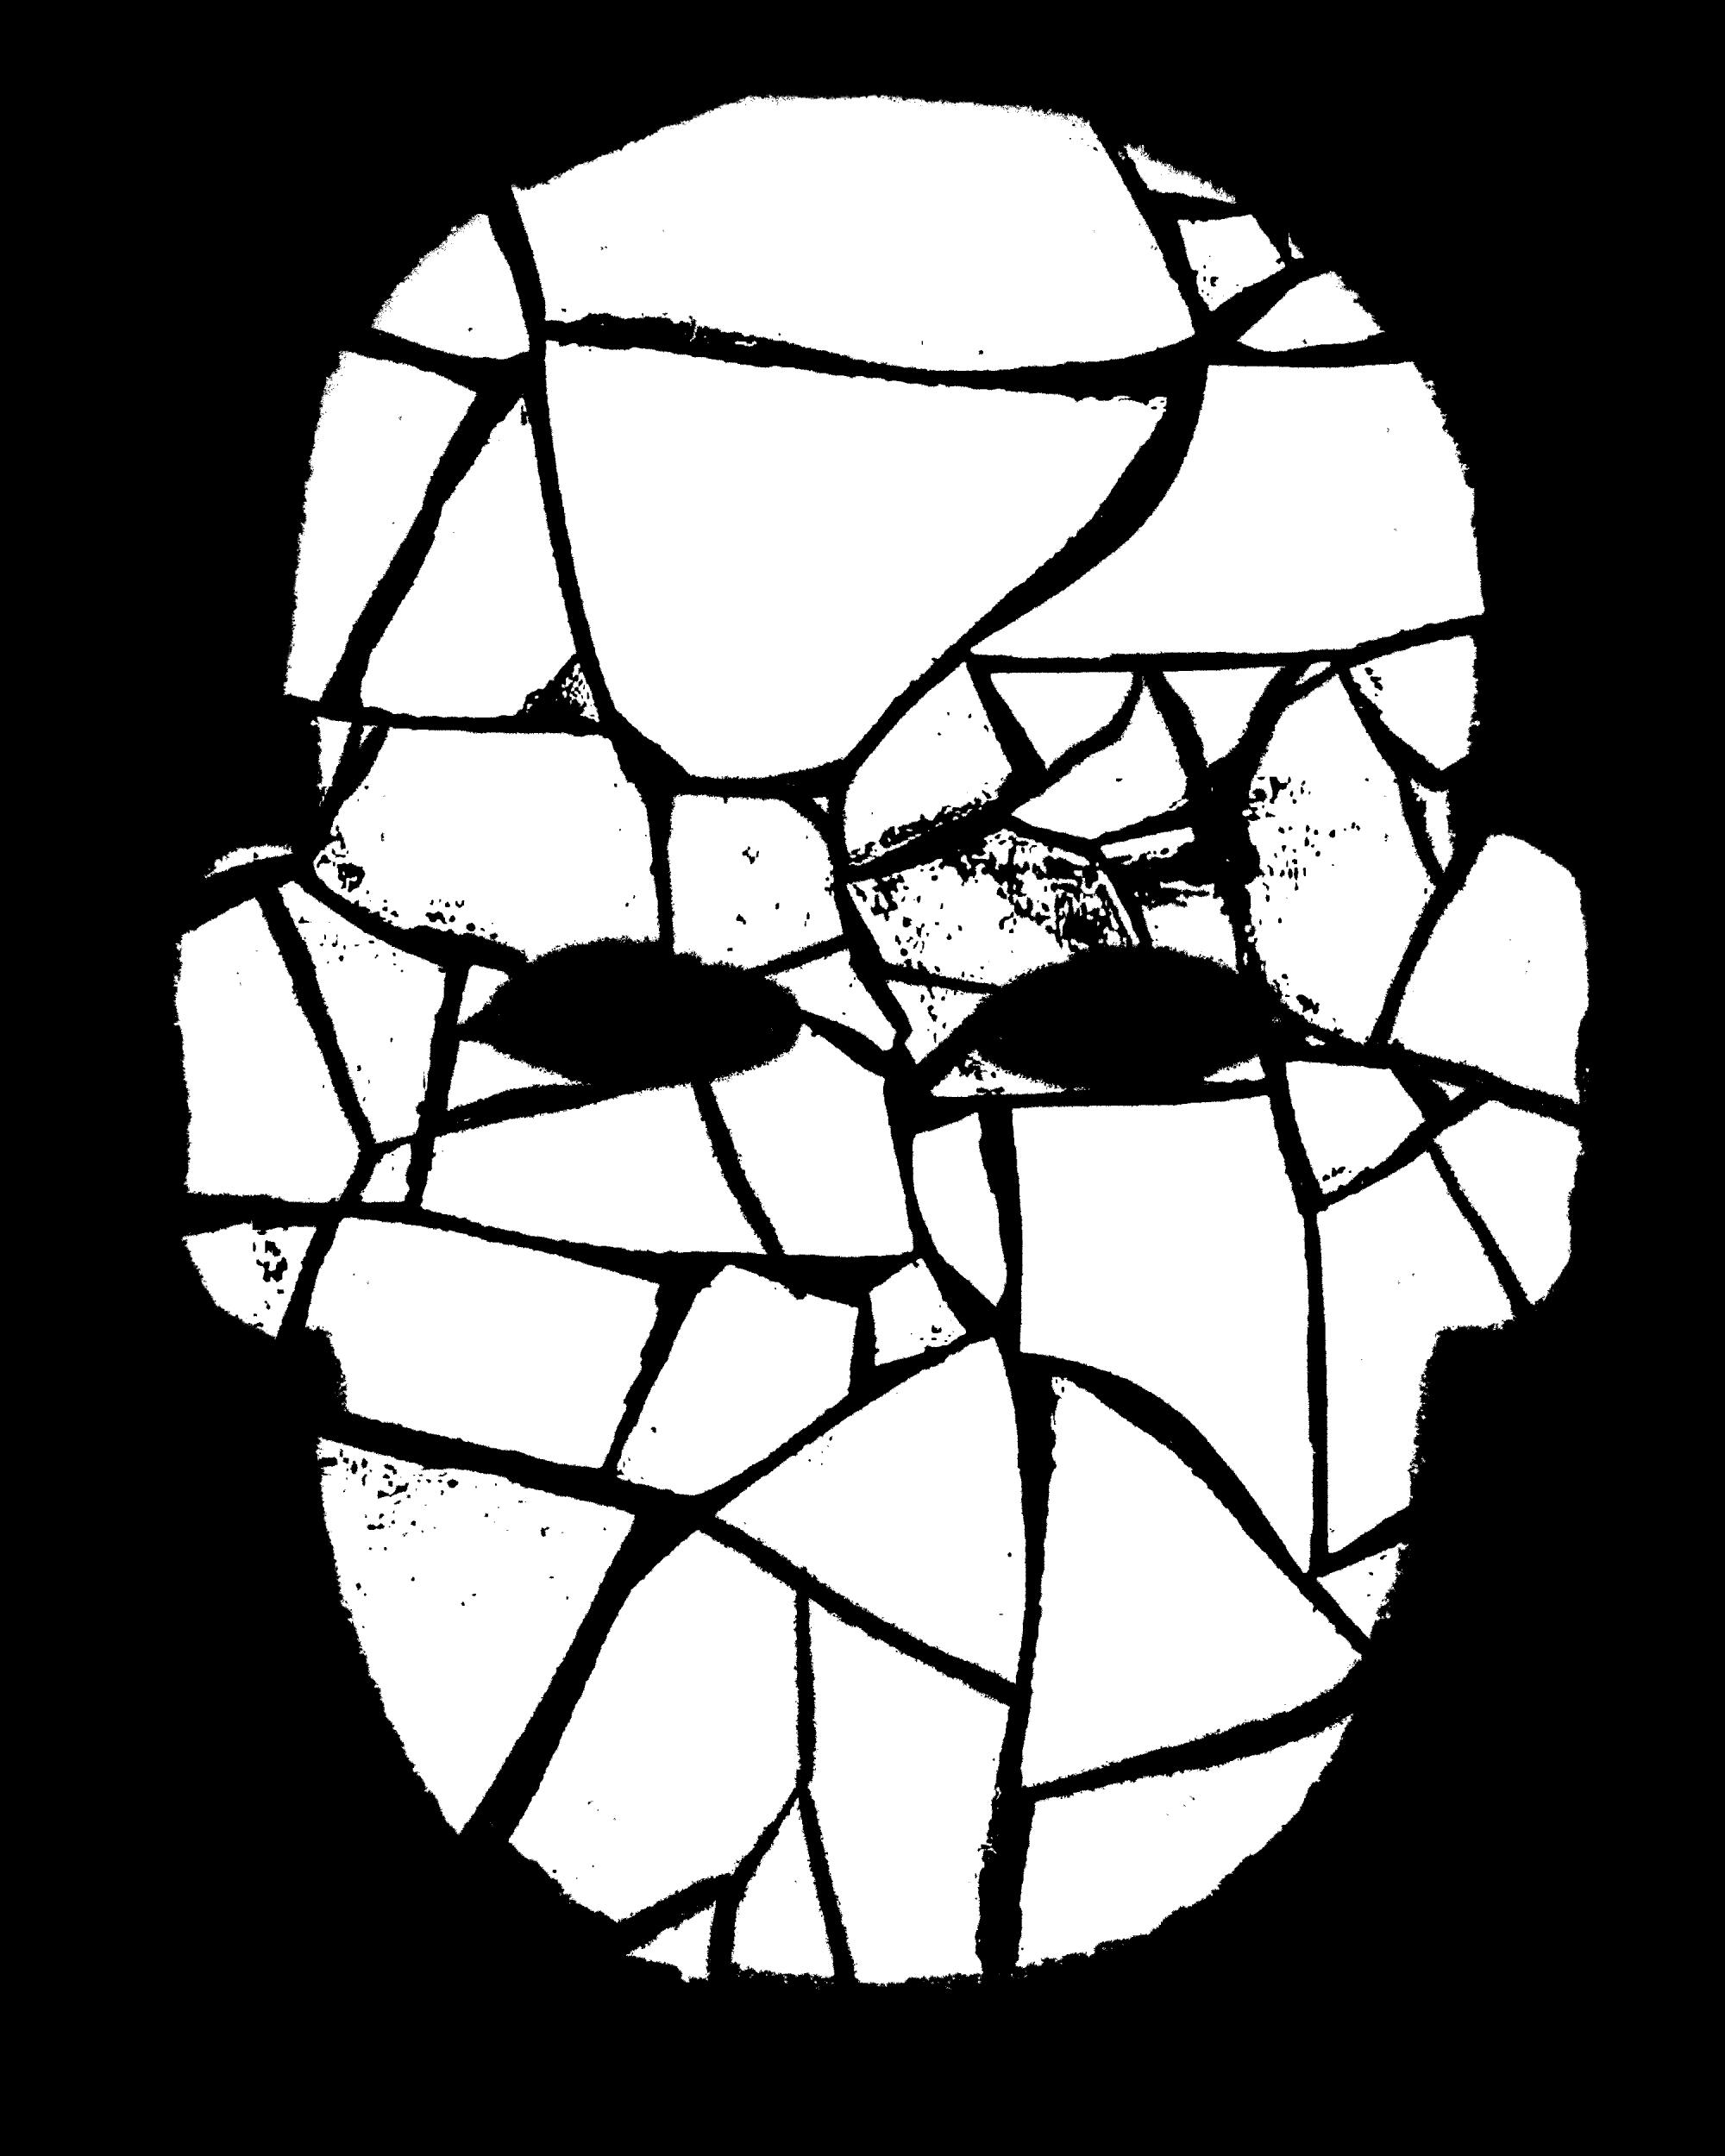 Illustration of a face with rubble texture on black background